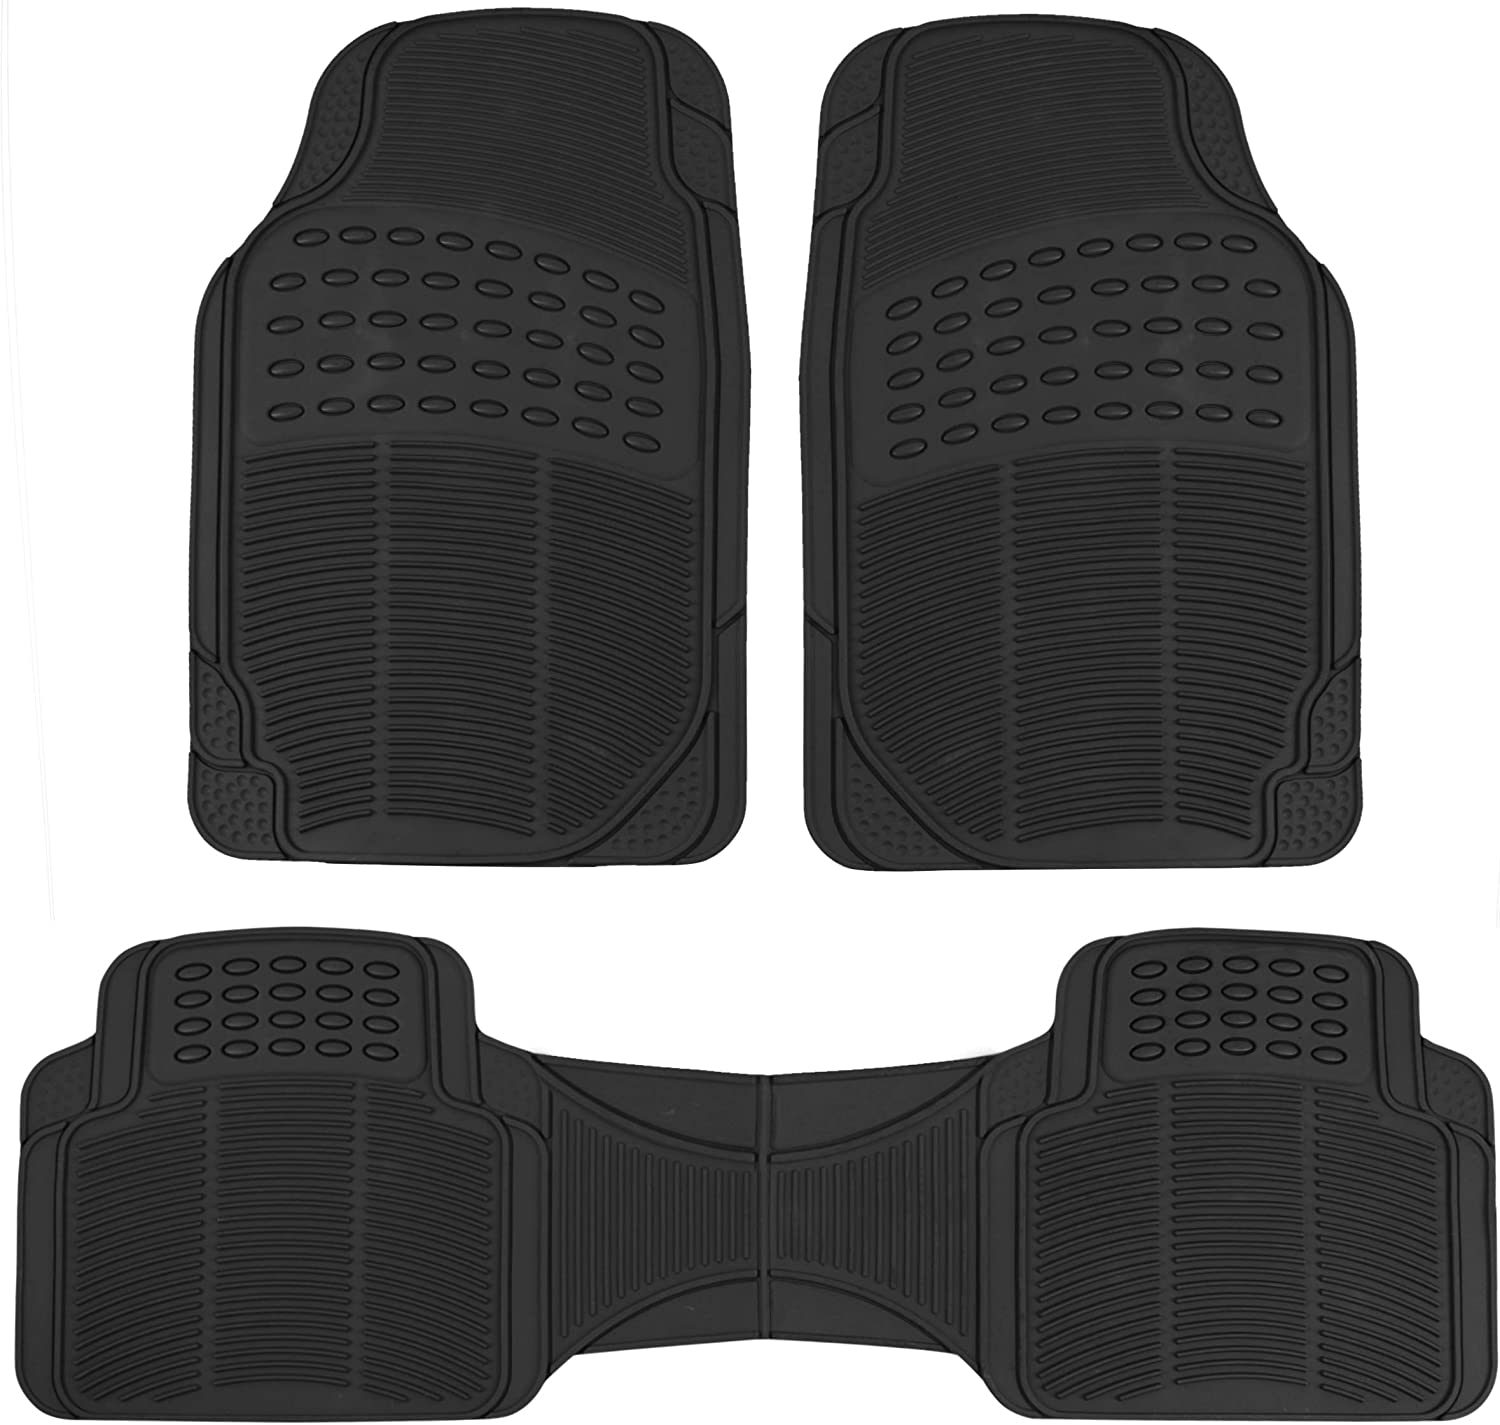 A Comprehensive Review of the Best Rubber Mats on the Market